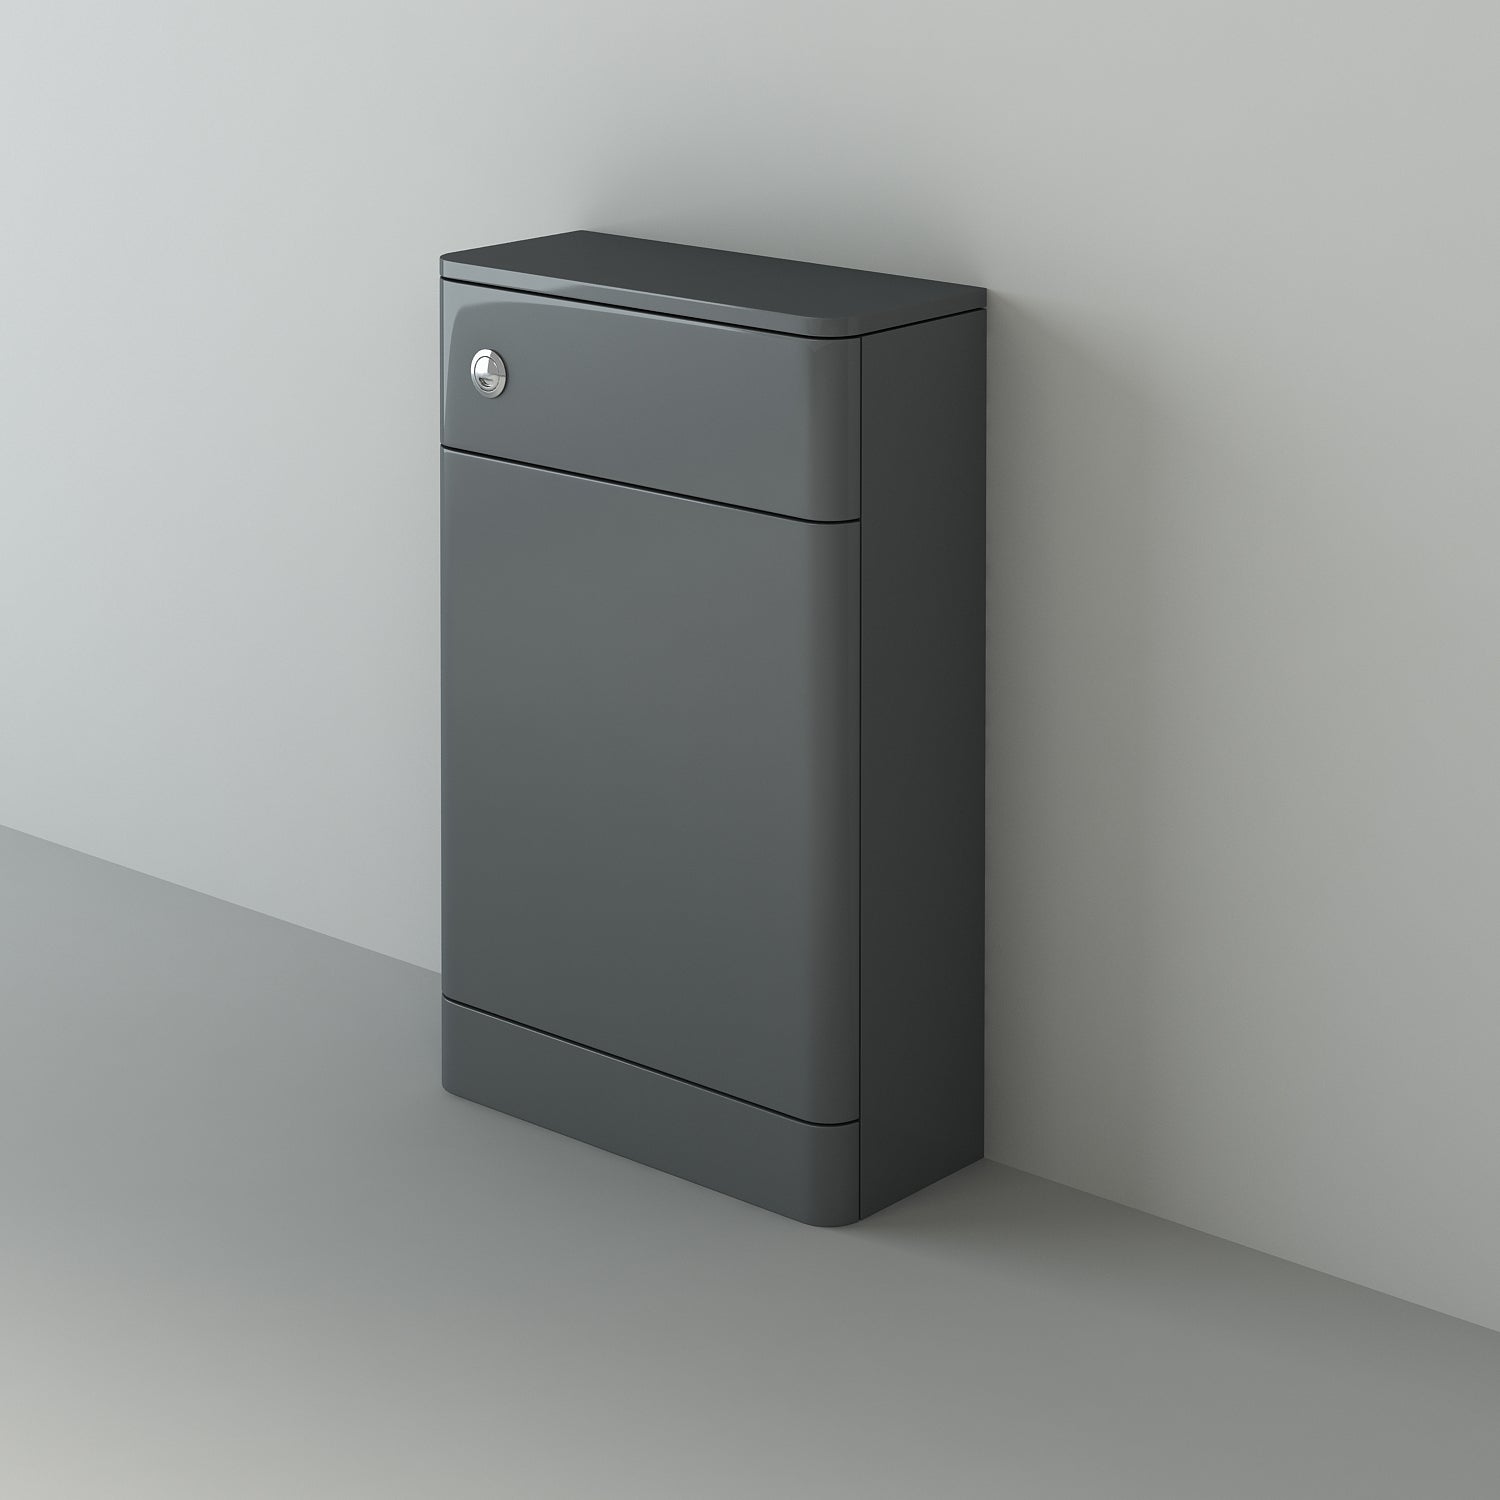 Denver WC Unit - 500mm x 217mm - Anthracite Grey Gloss (Flat Pack)